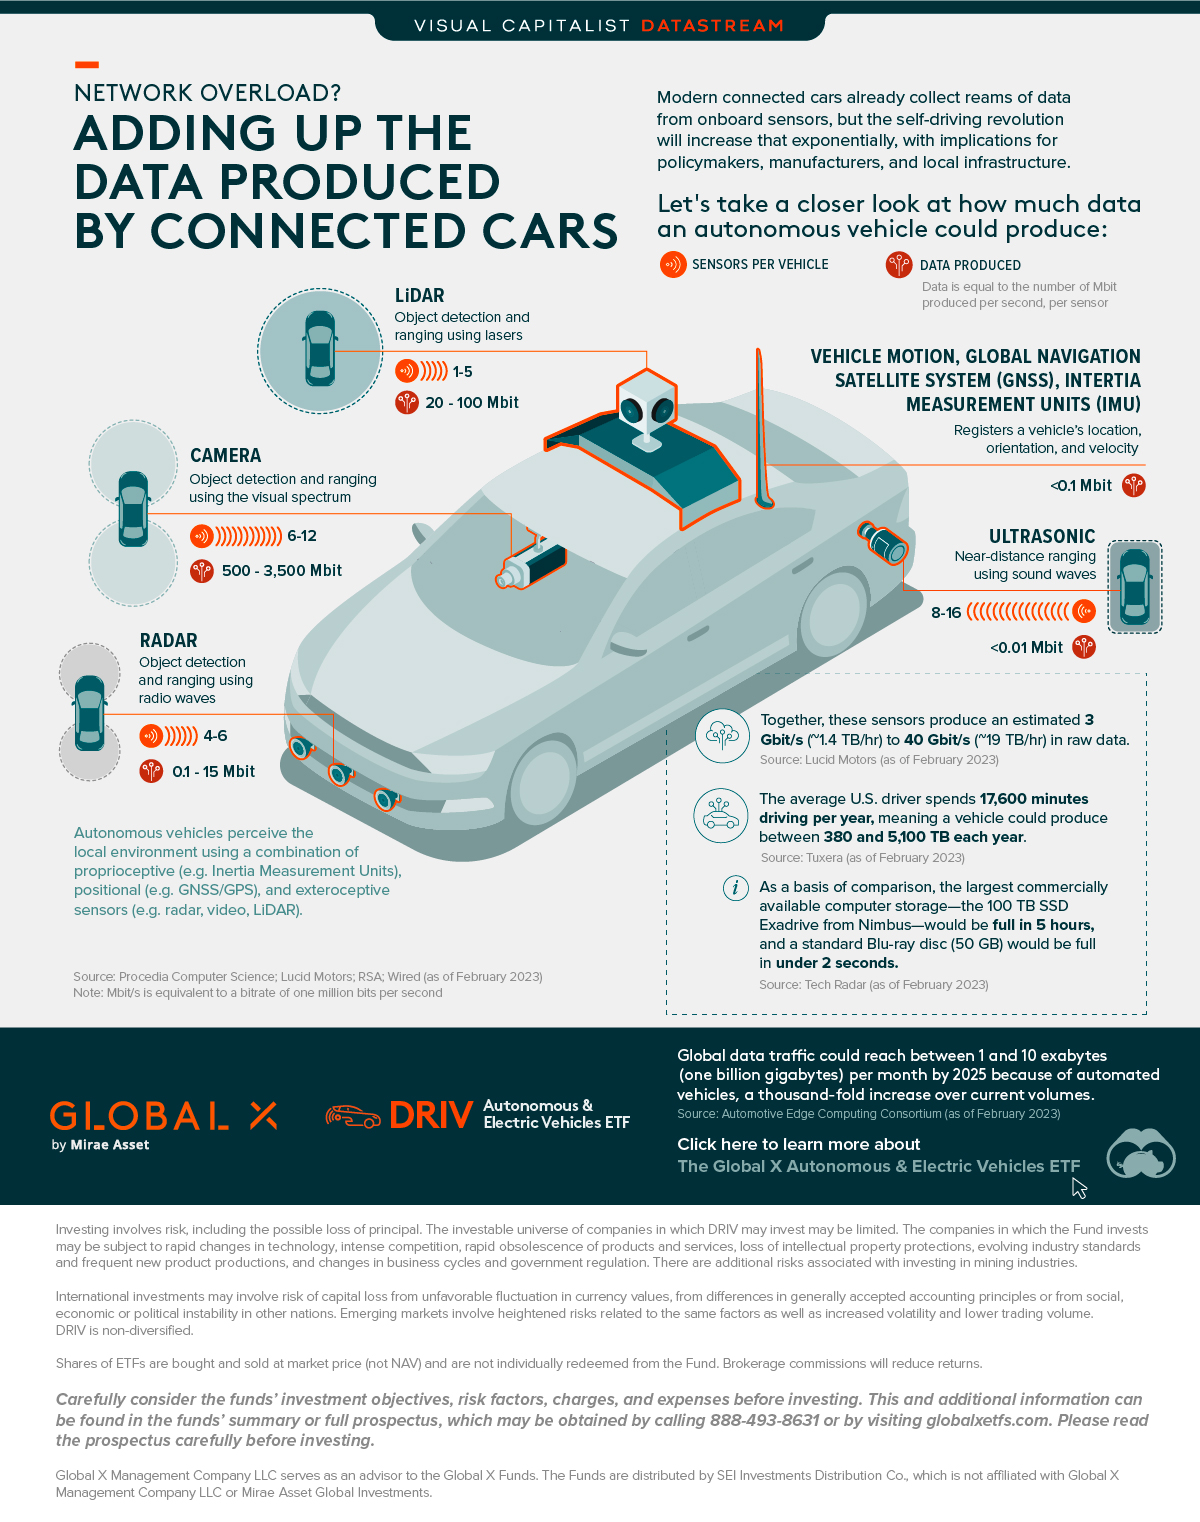 Infographic showing how much data produced by a connected car